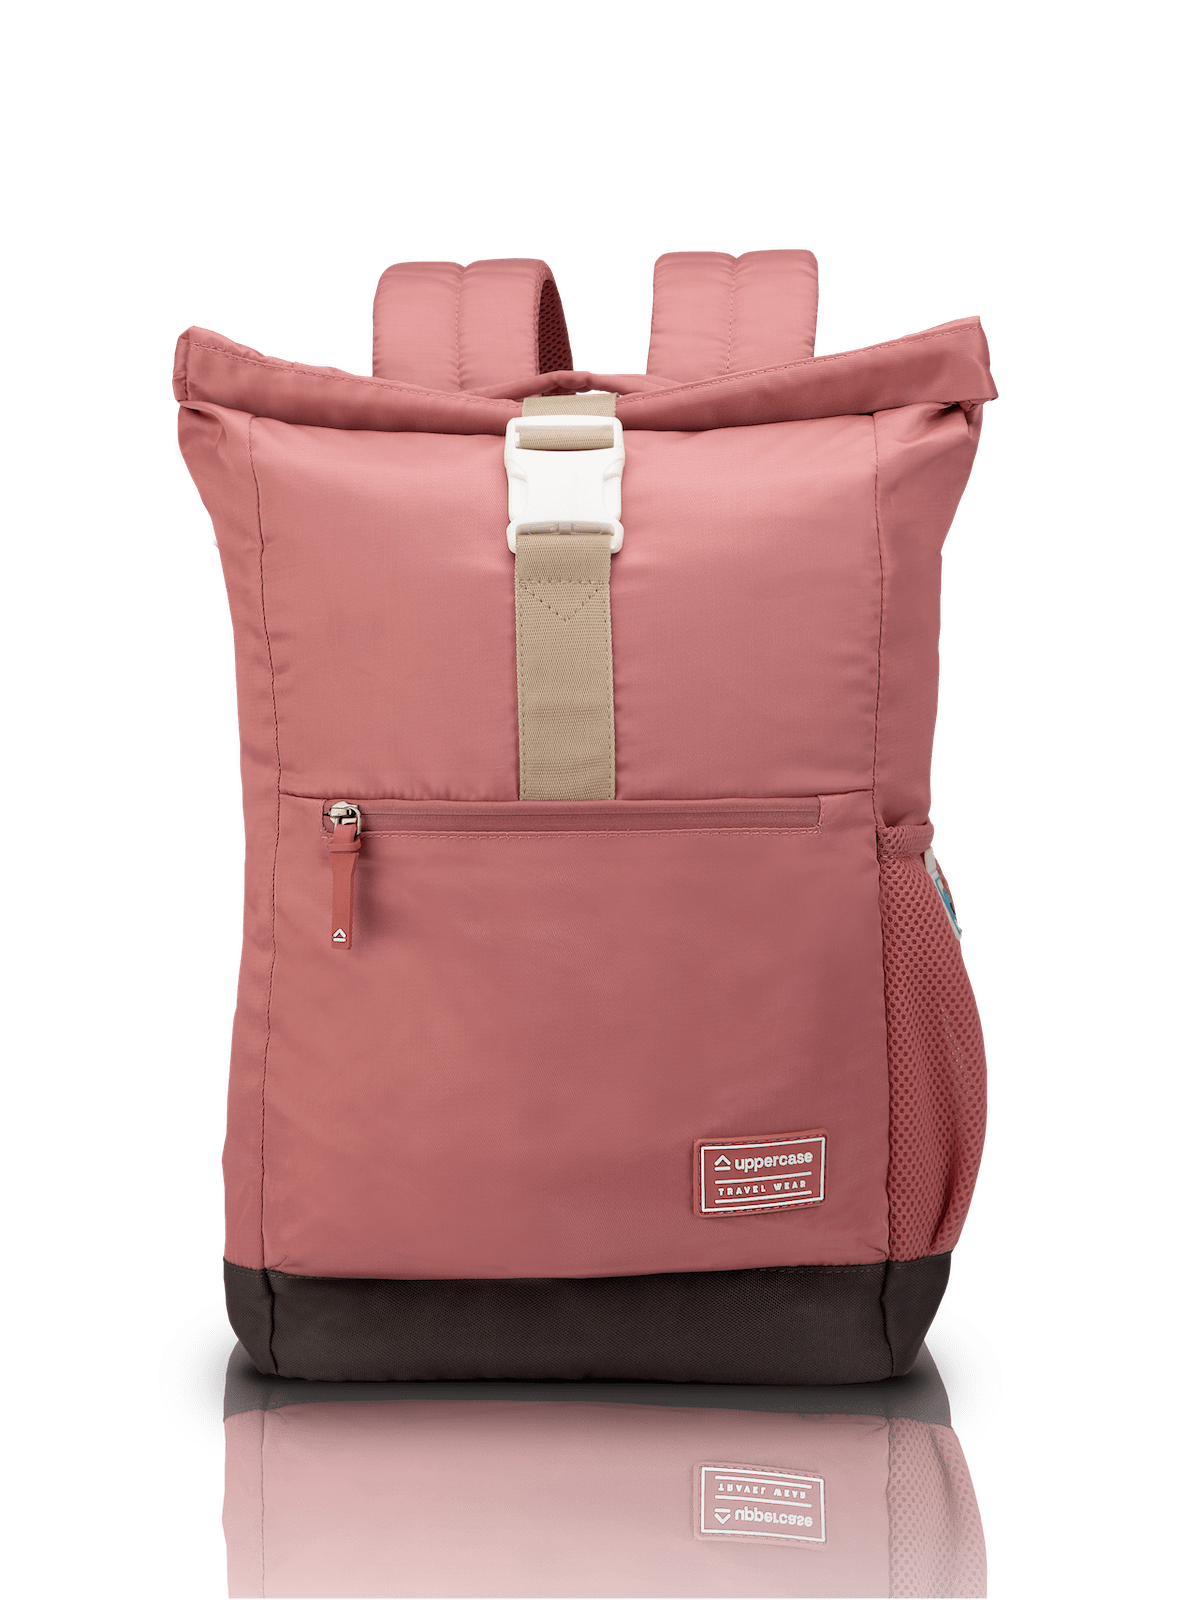 uppercase Roll Top 14.6" Laptop Backpack Water Repellent College Bag 14L Pink